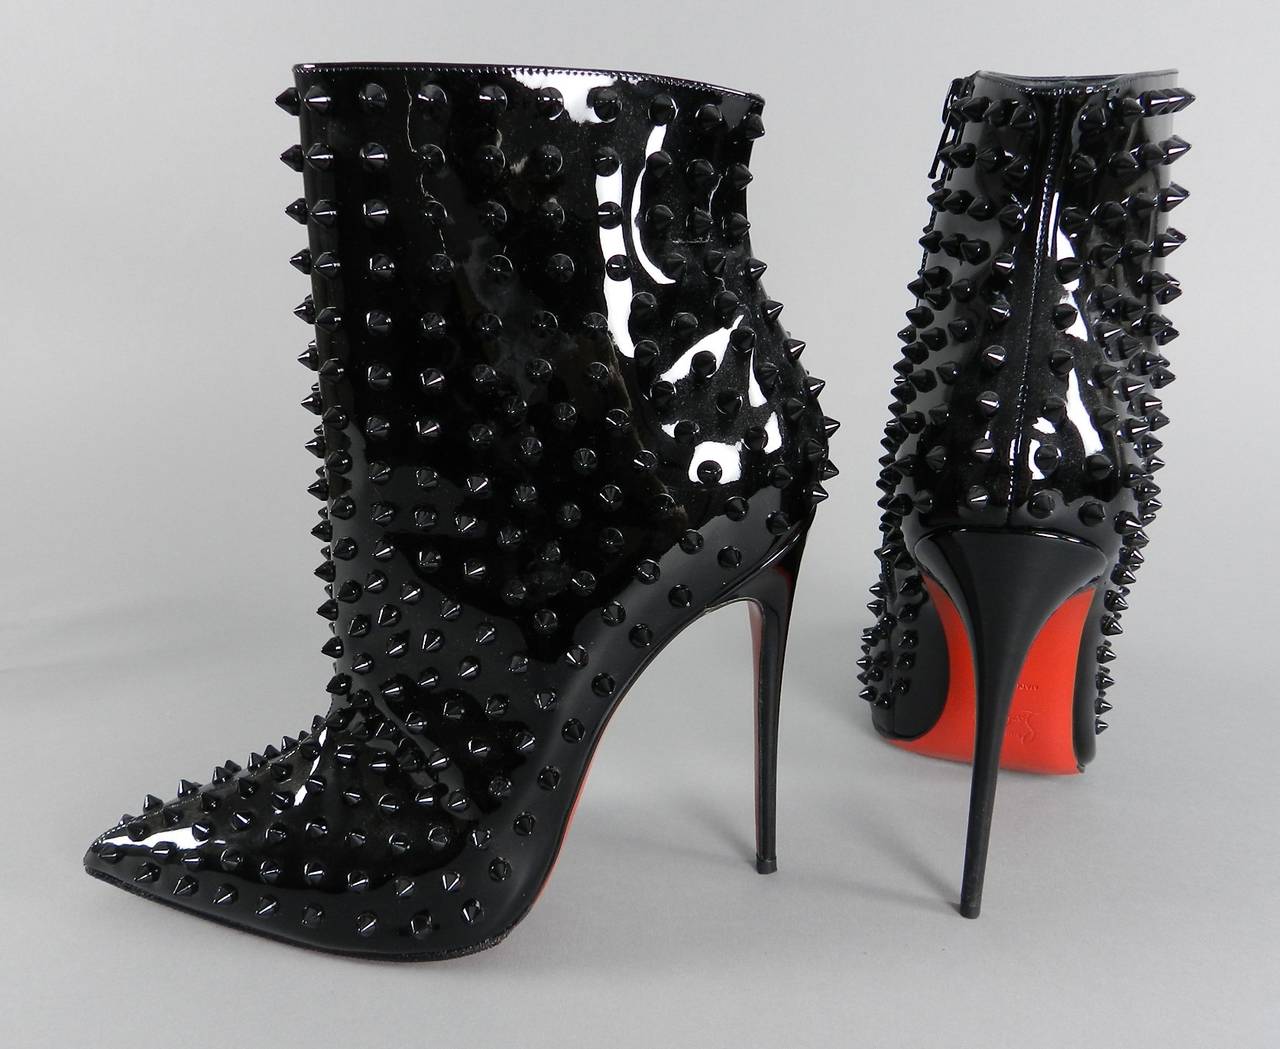 Christian Louboutin Snakilta 120 black patent leather and studded ankle booties. Side zipper, super high stiletto heels, grip soles added.  New - unworn.  Marked size 41.  Original retail $1975+ 

Shipping prices provided are for tracked Ground